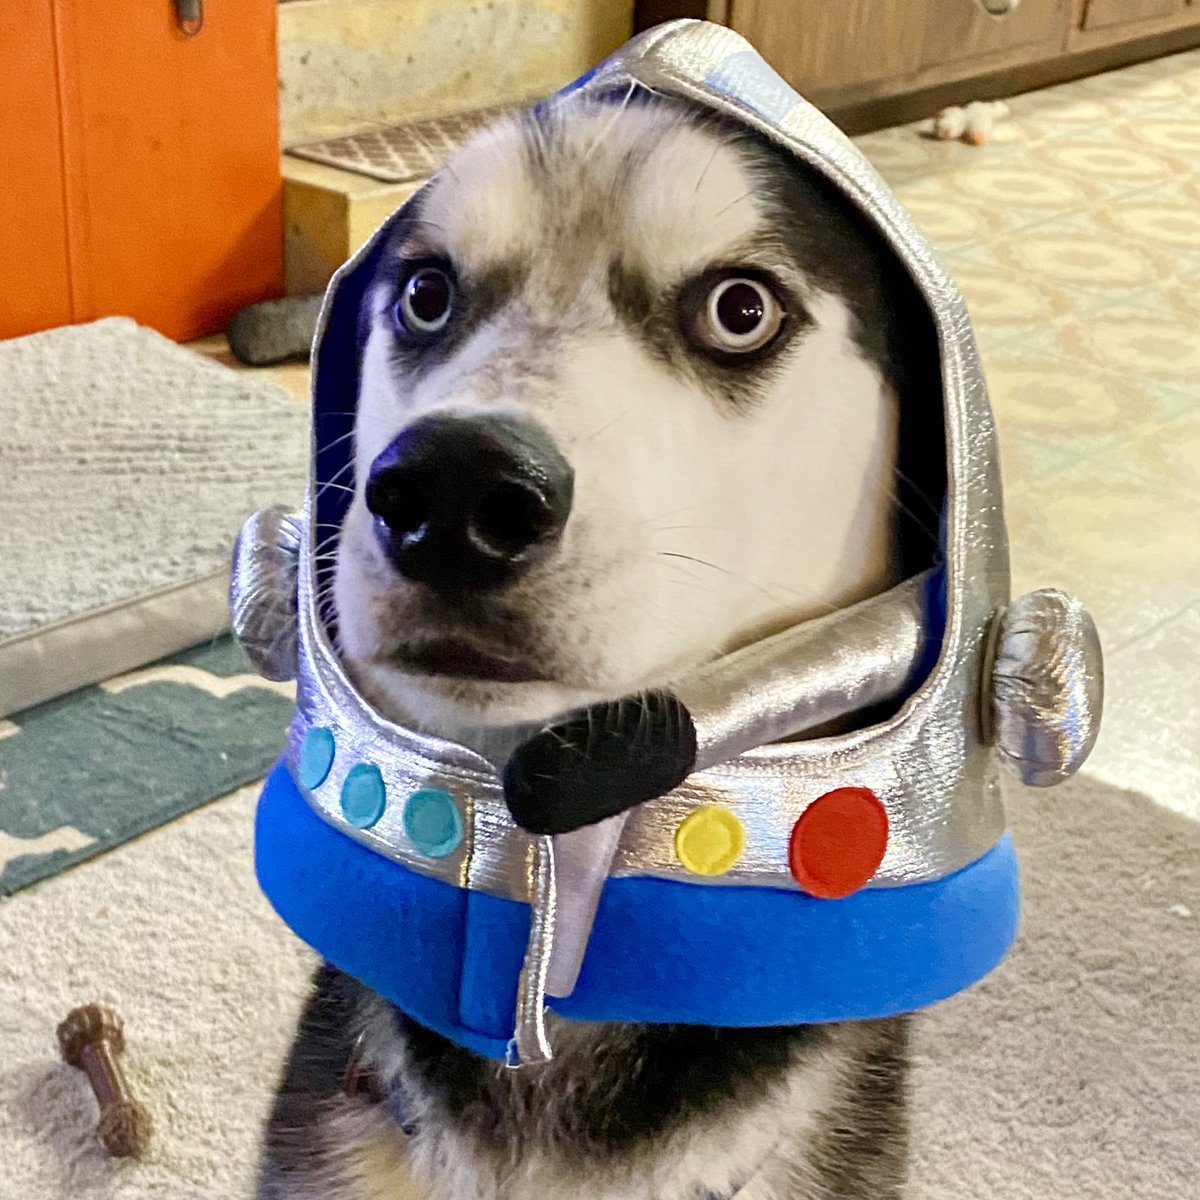 Sif is ready for blast off 🚀🚀
#dogsoftwitter #huskiesoftwitter